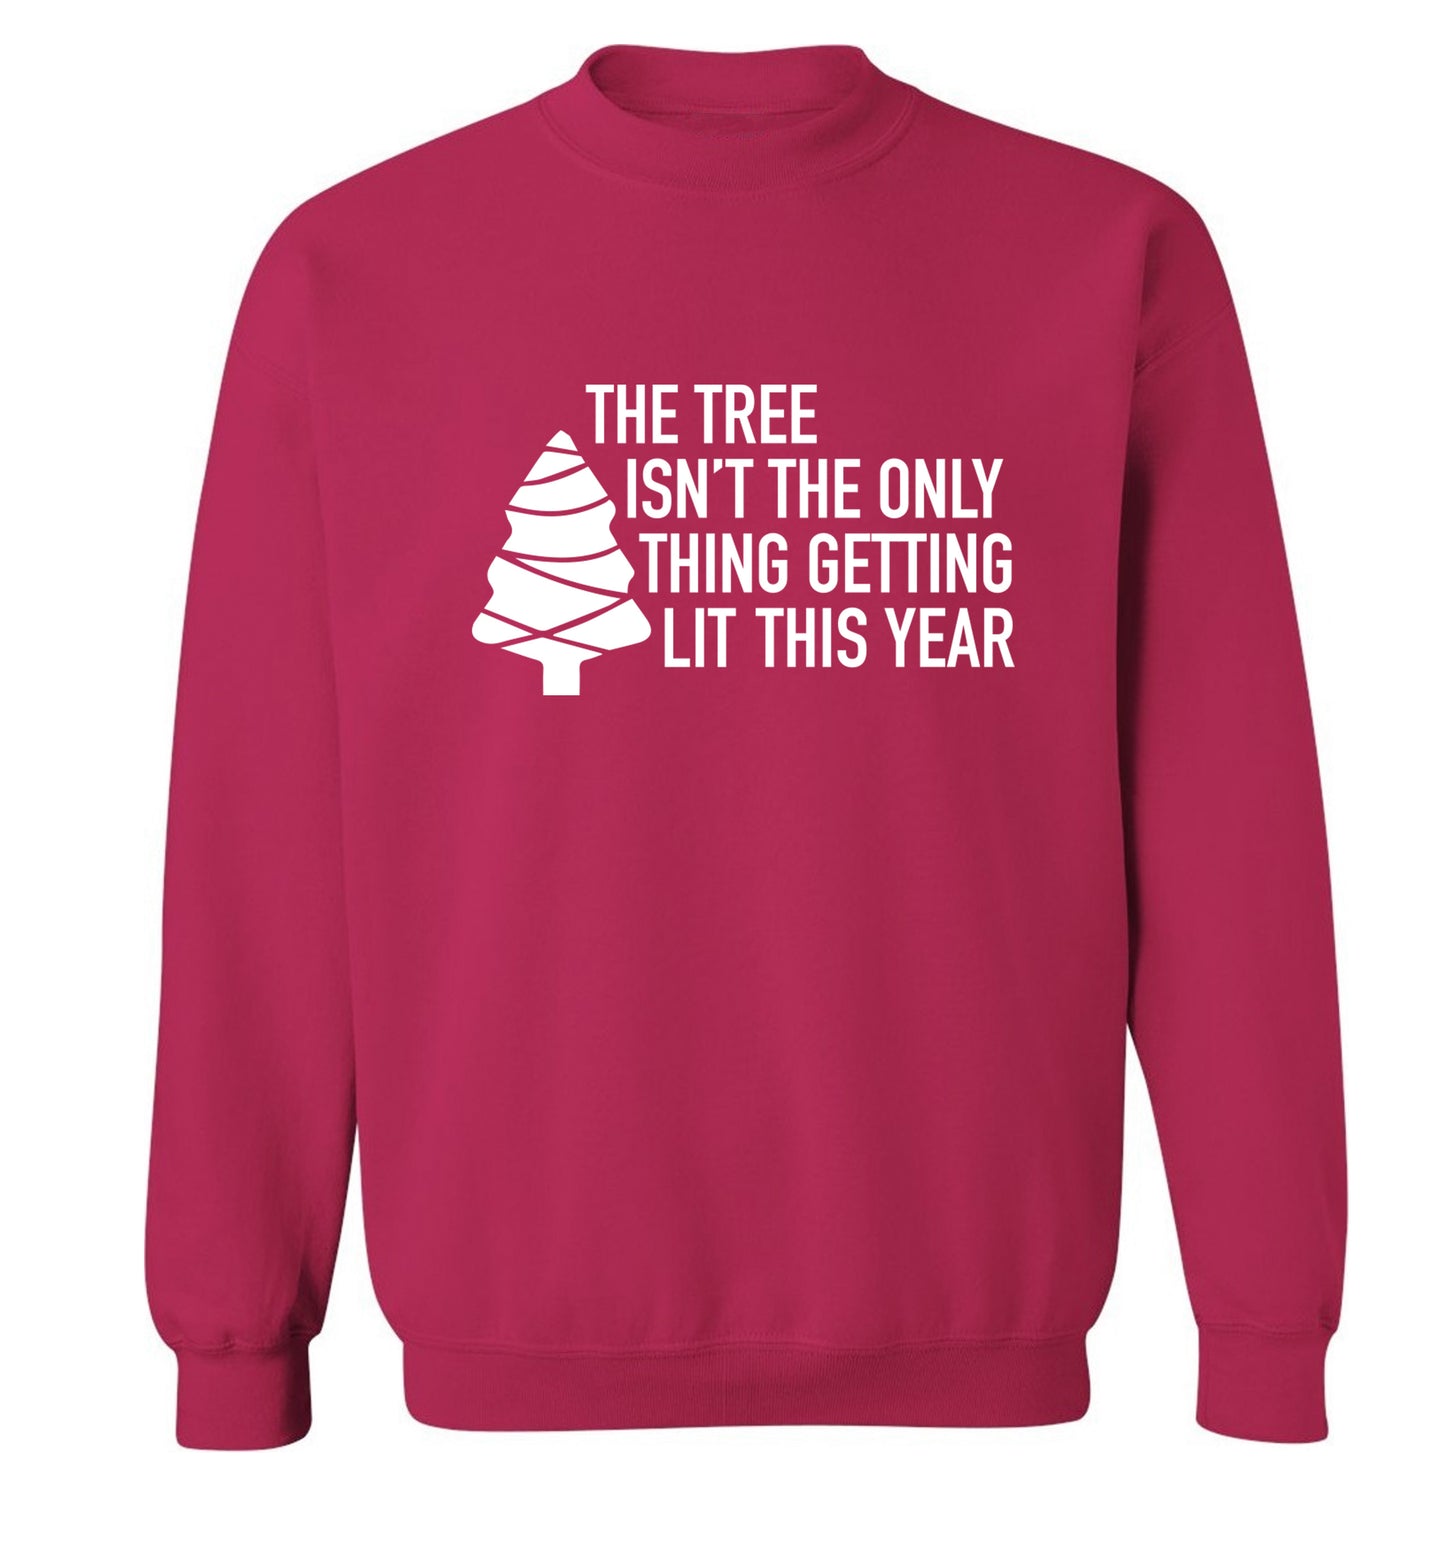 The tree isn't the only thing getting lit this year Adult's unisex pink Sweater 2XL